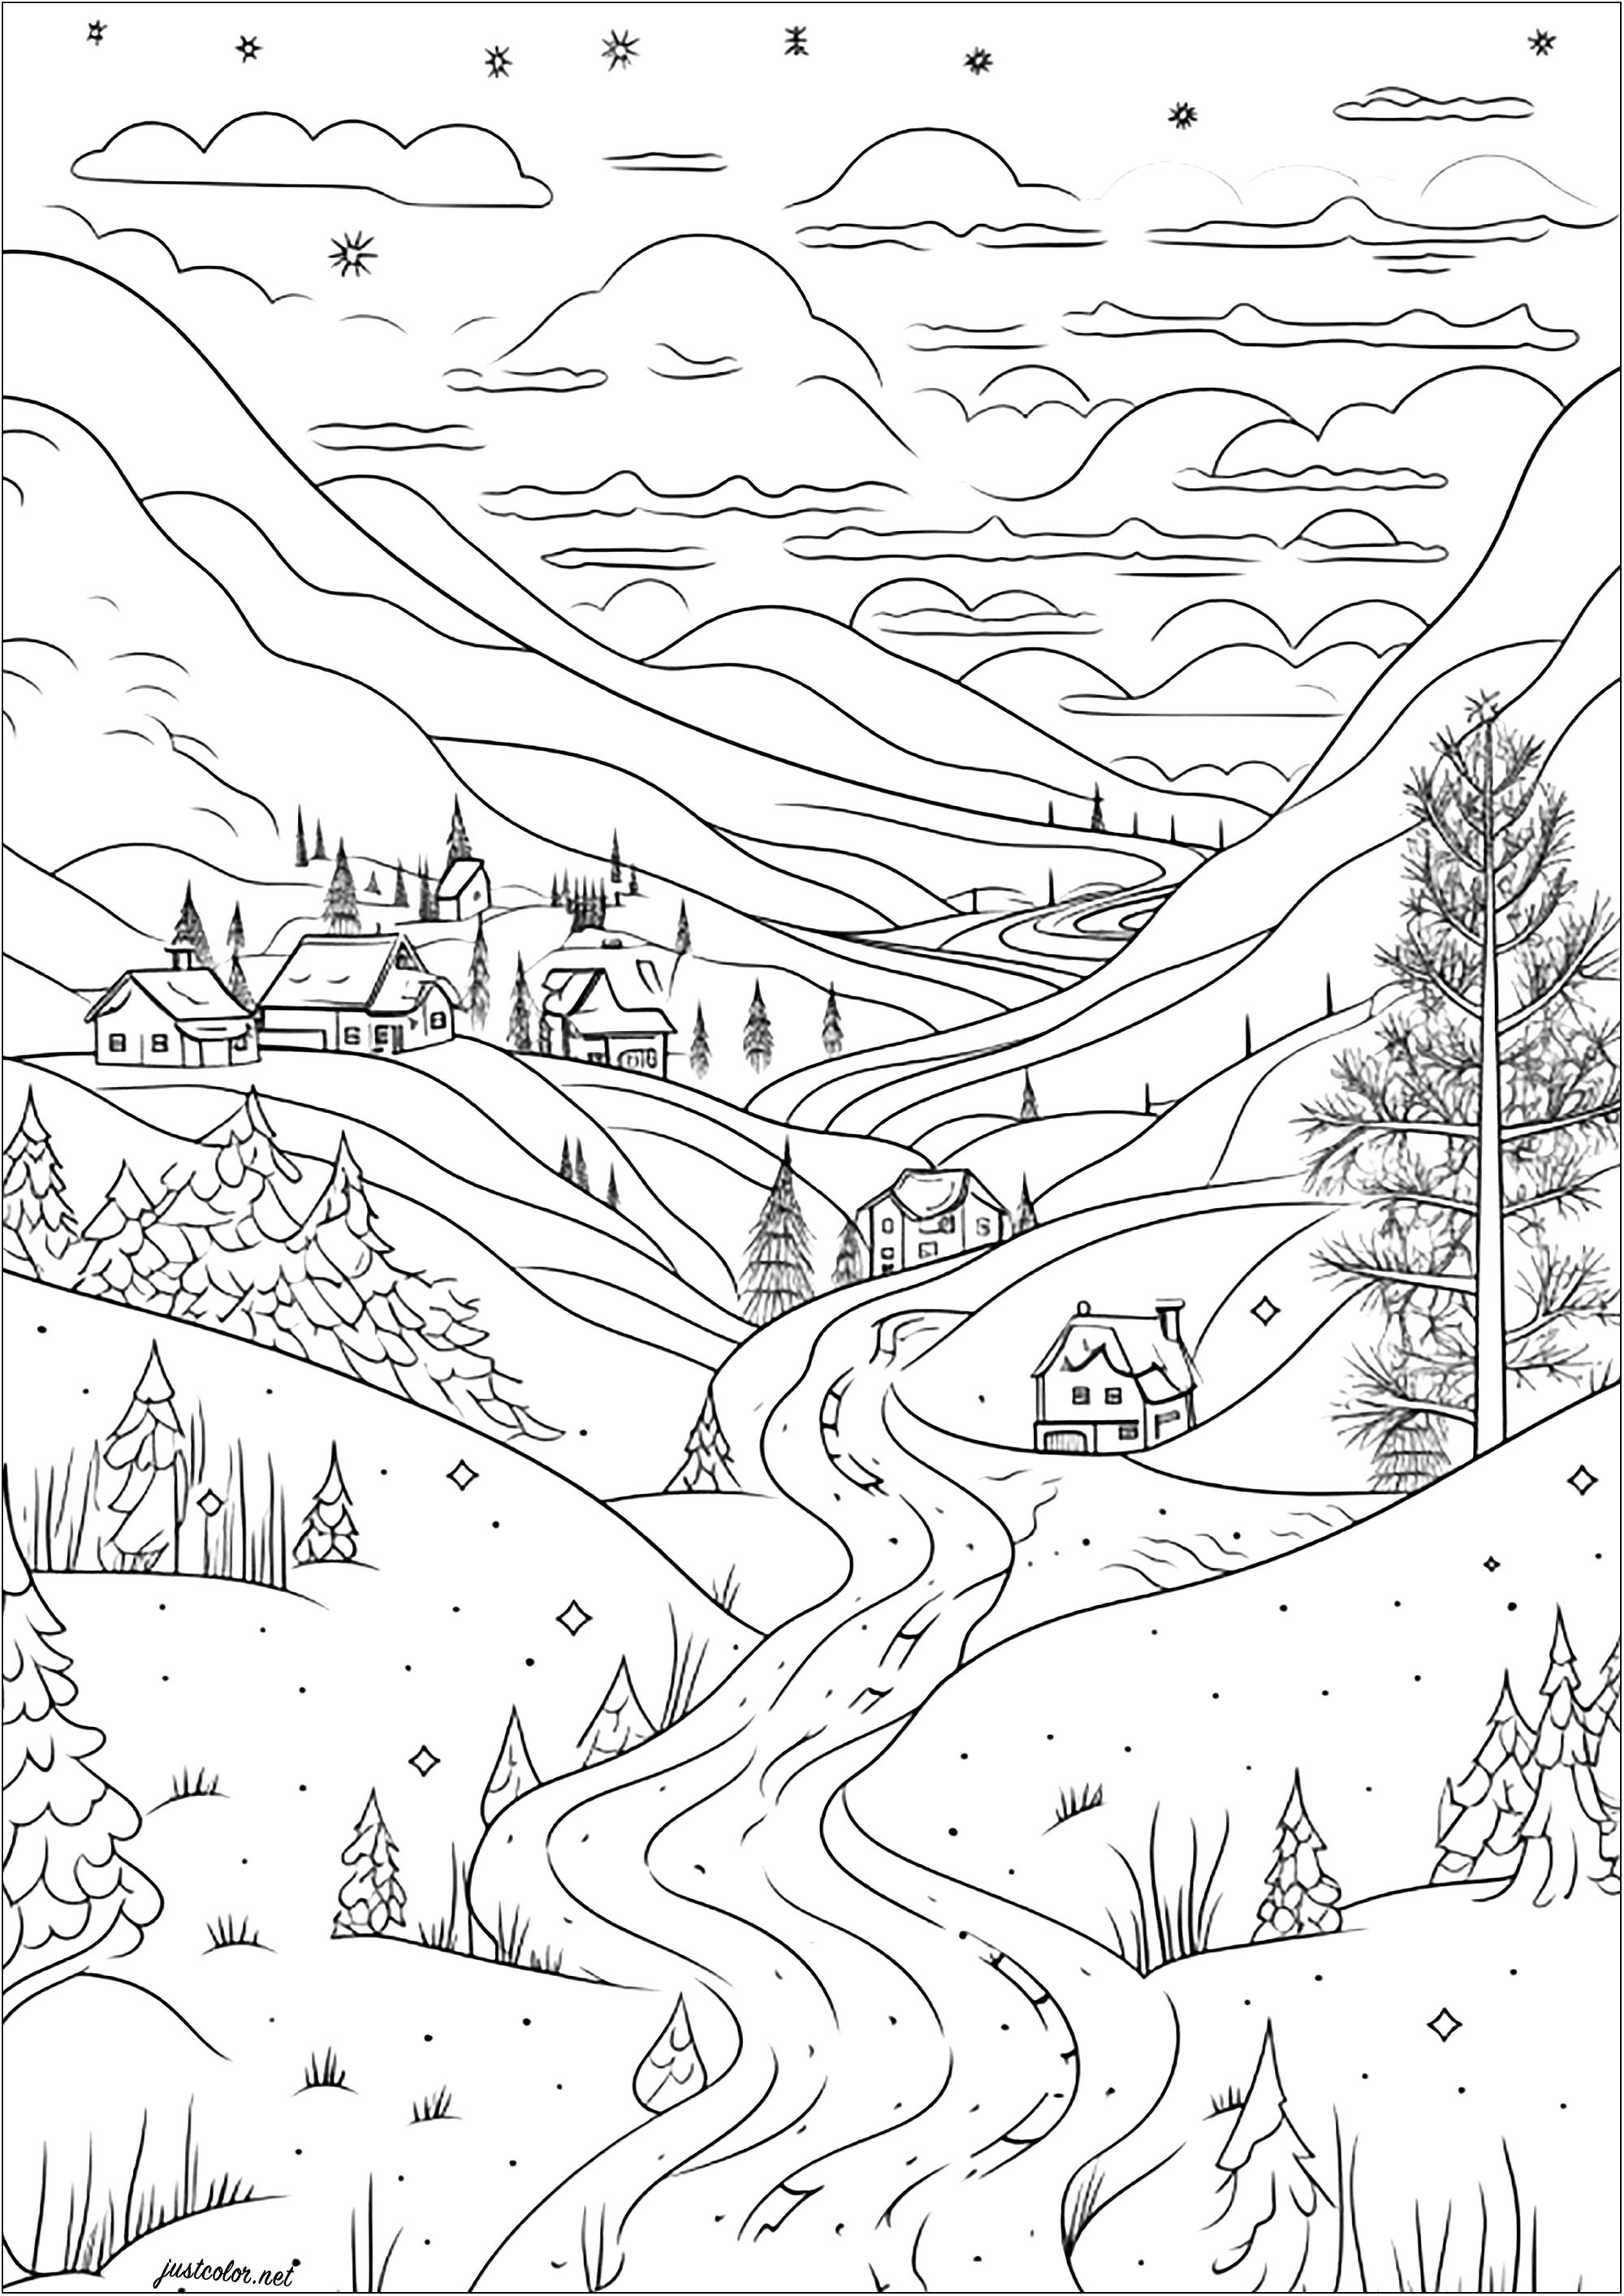 A pretty snow-covered village. Pretty houses, fir trees and mountains